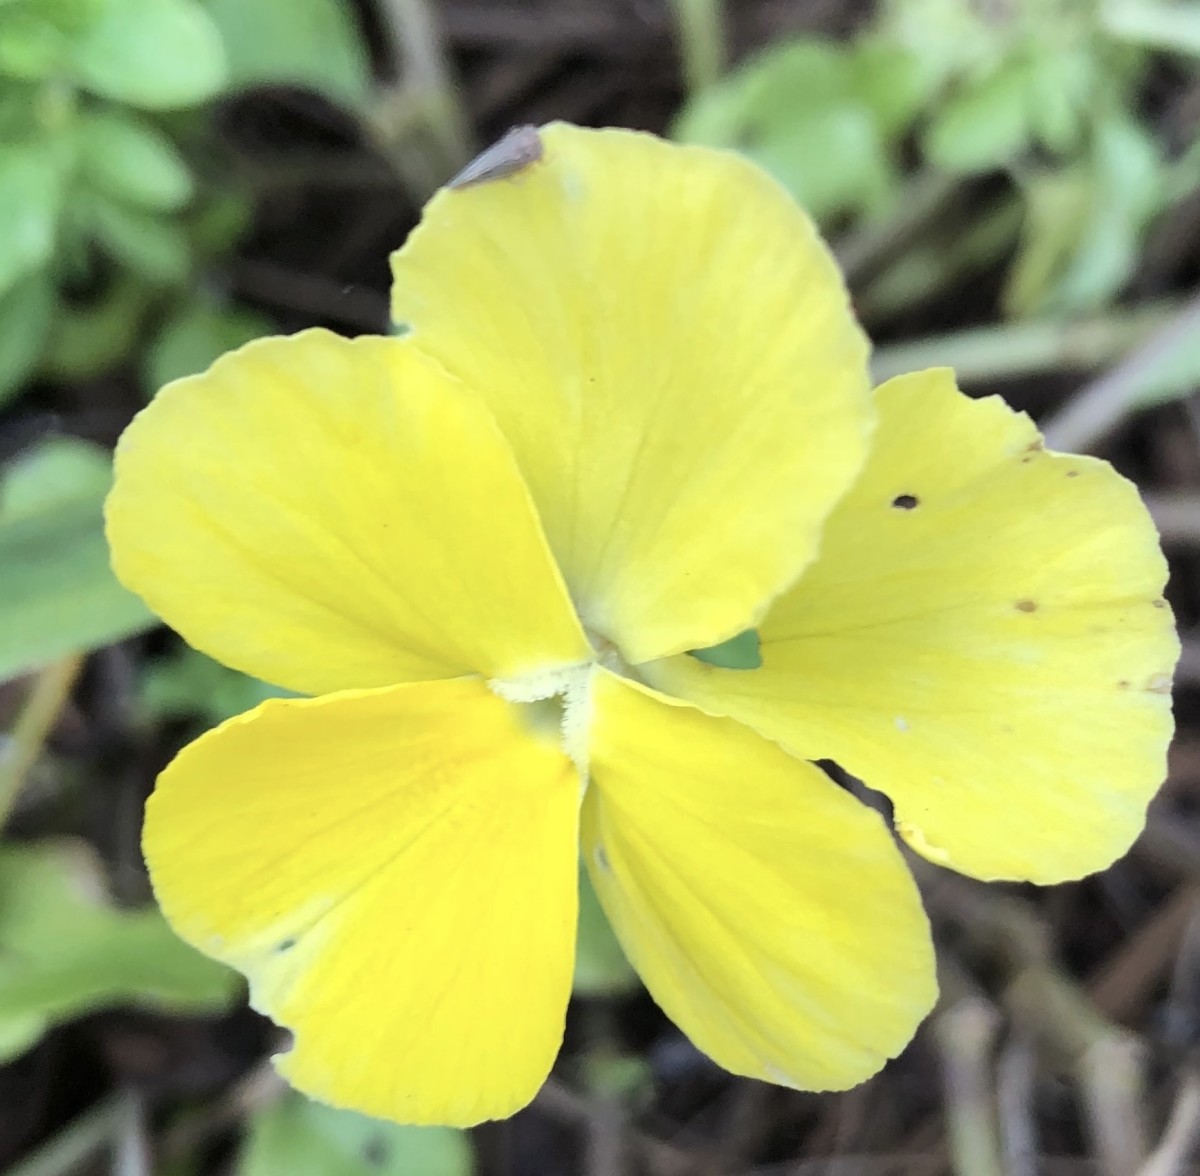 This one appears to be a viola, one of the smaller flowers of this family.